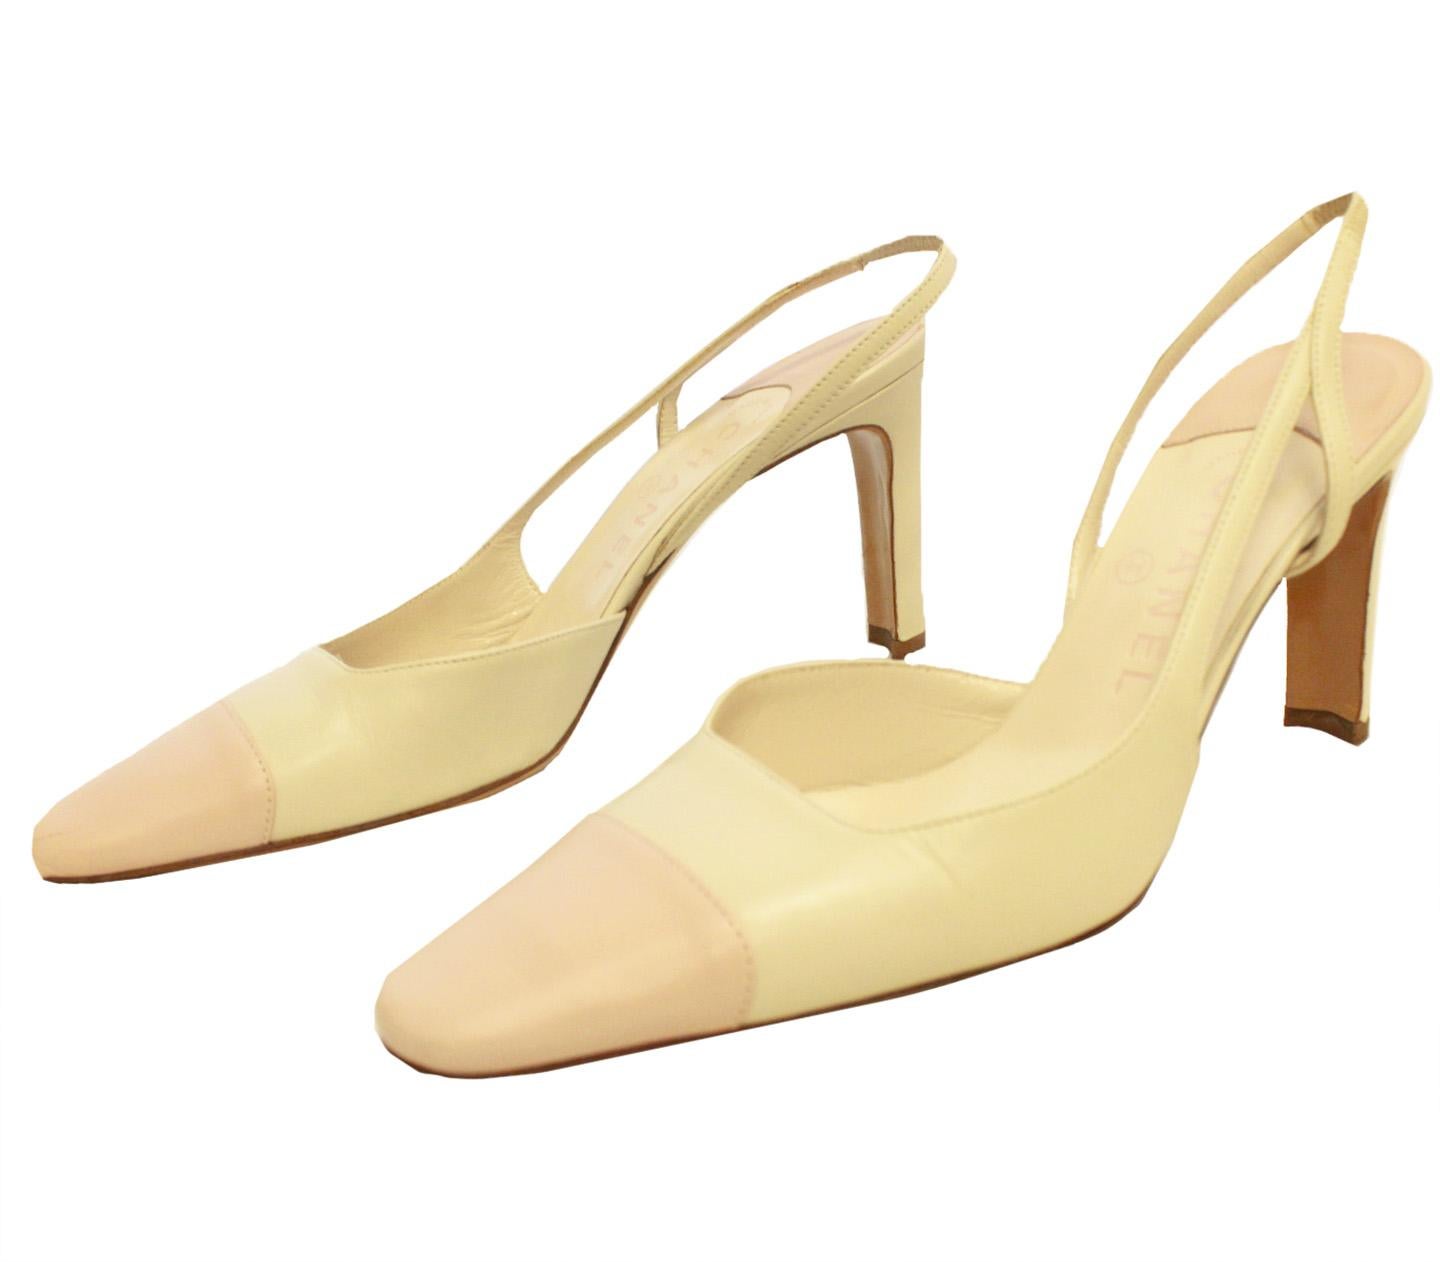 Chanel beige and pink leather slingback heels features signature cap toes in soft pink.  These shoes have at back elasticized ankle straps and covered square heels. The cream leather insoles are stamped “Chanel Made In Italy” in light pink.  With